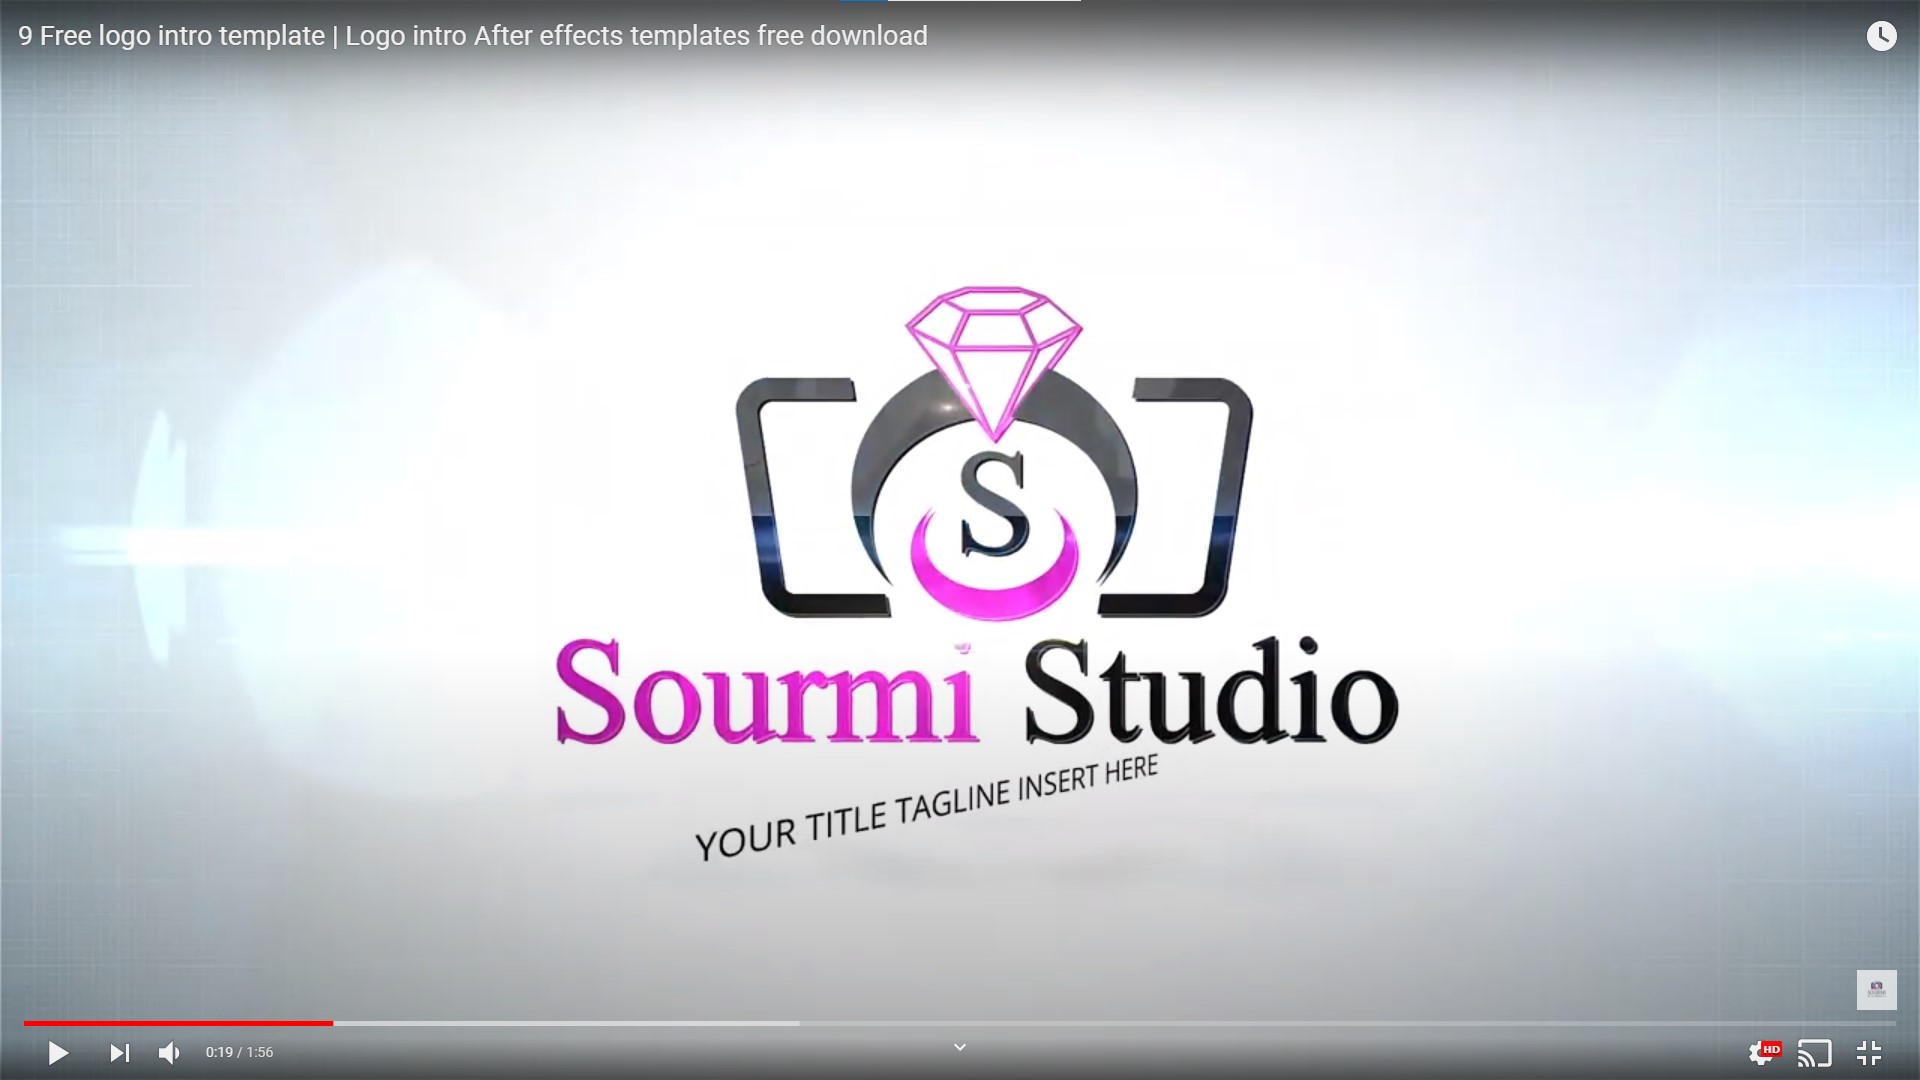 20-free-animation-logo-intro-for-adobe-after-effects-part-20